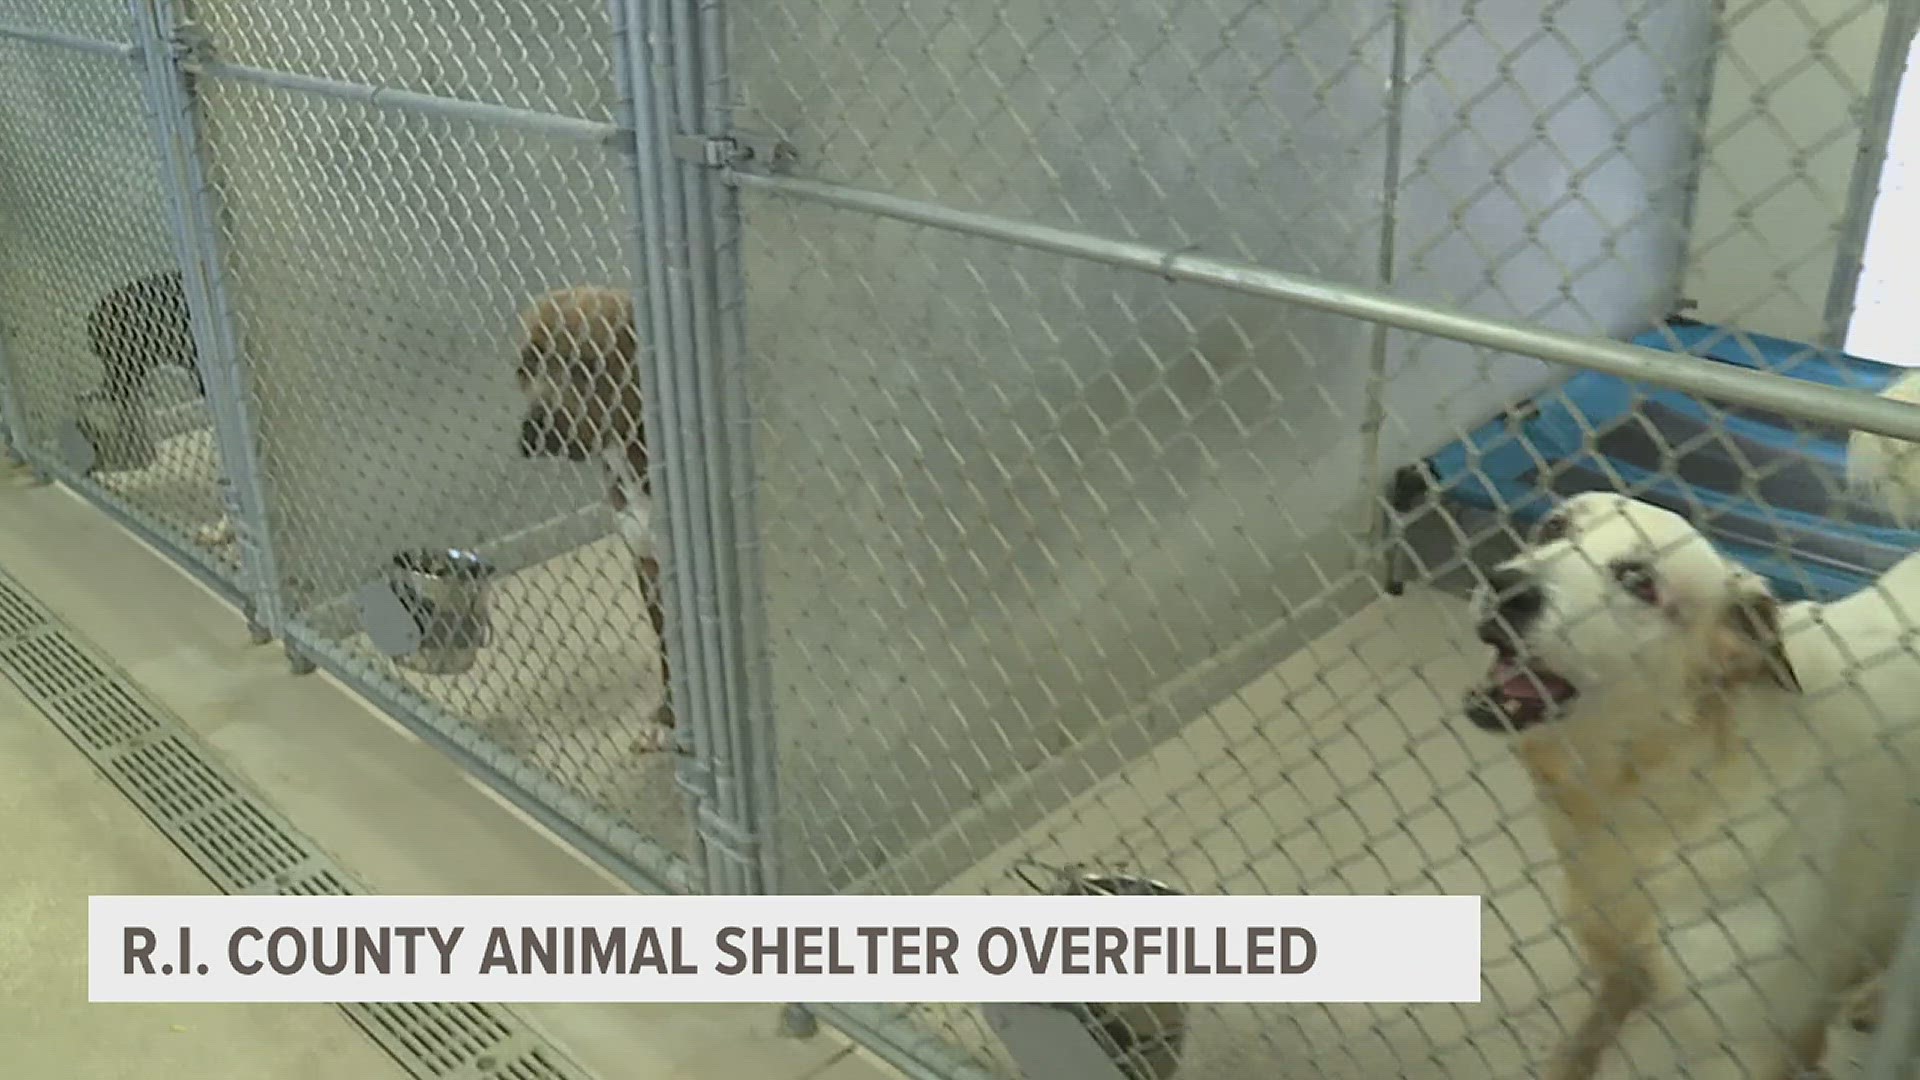 Shelter officials say this is the fullest they've been in the organization's 17-year history.